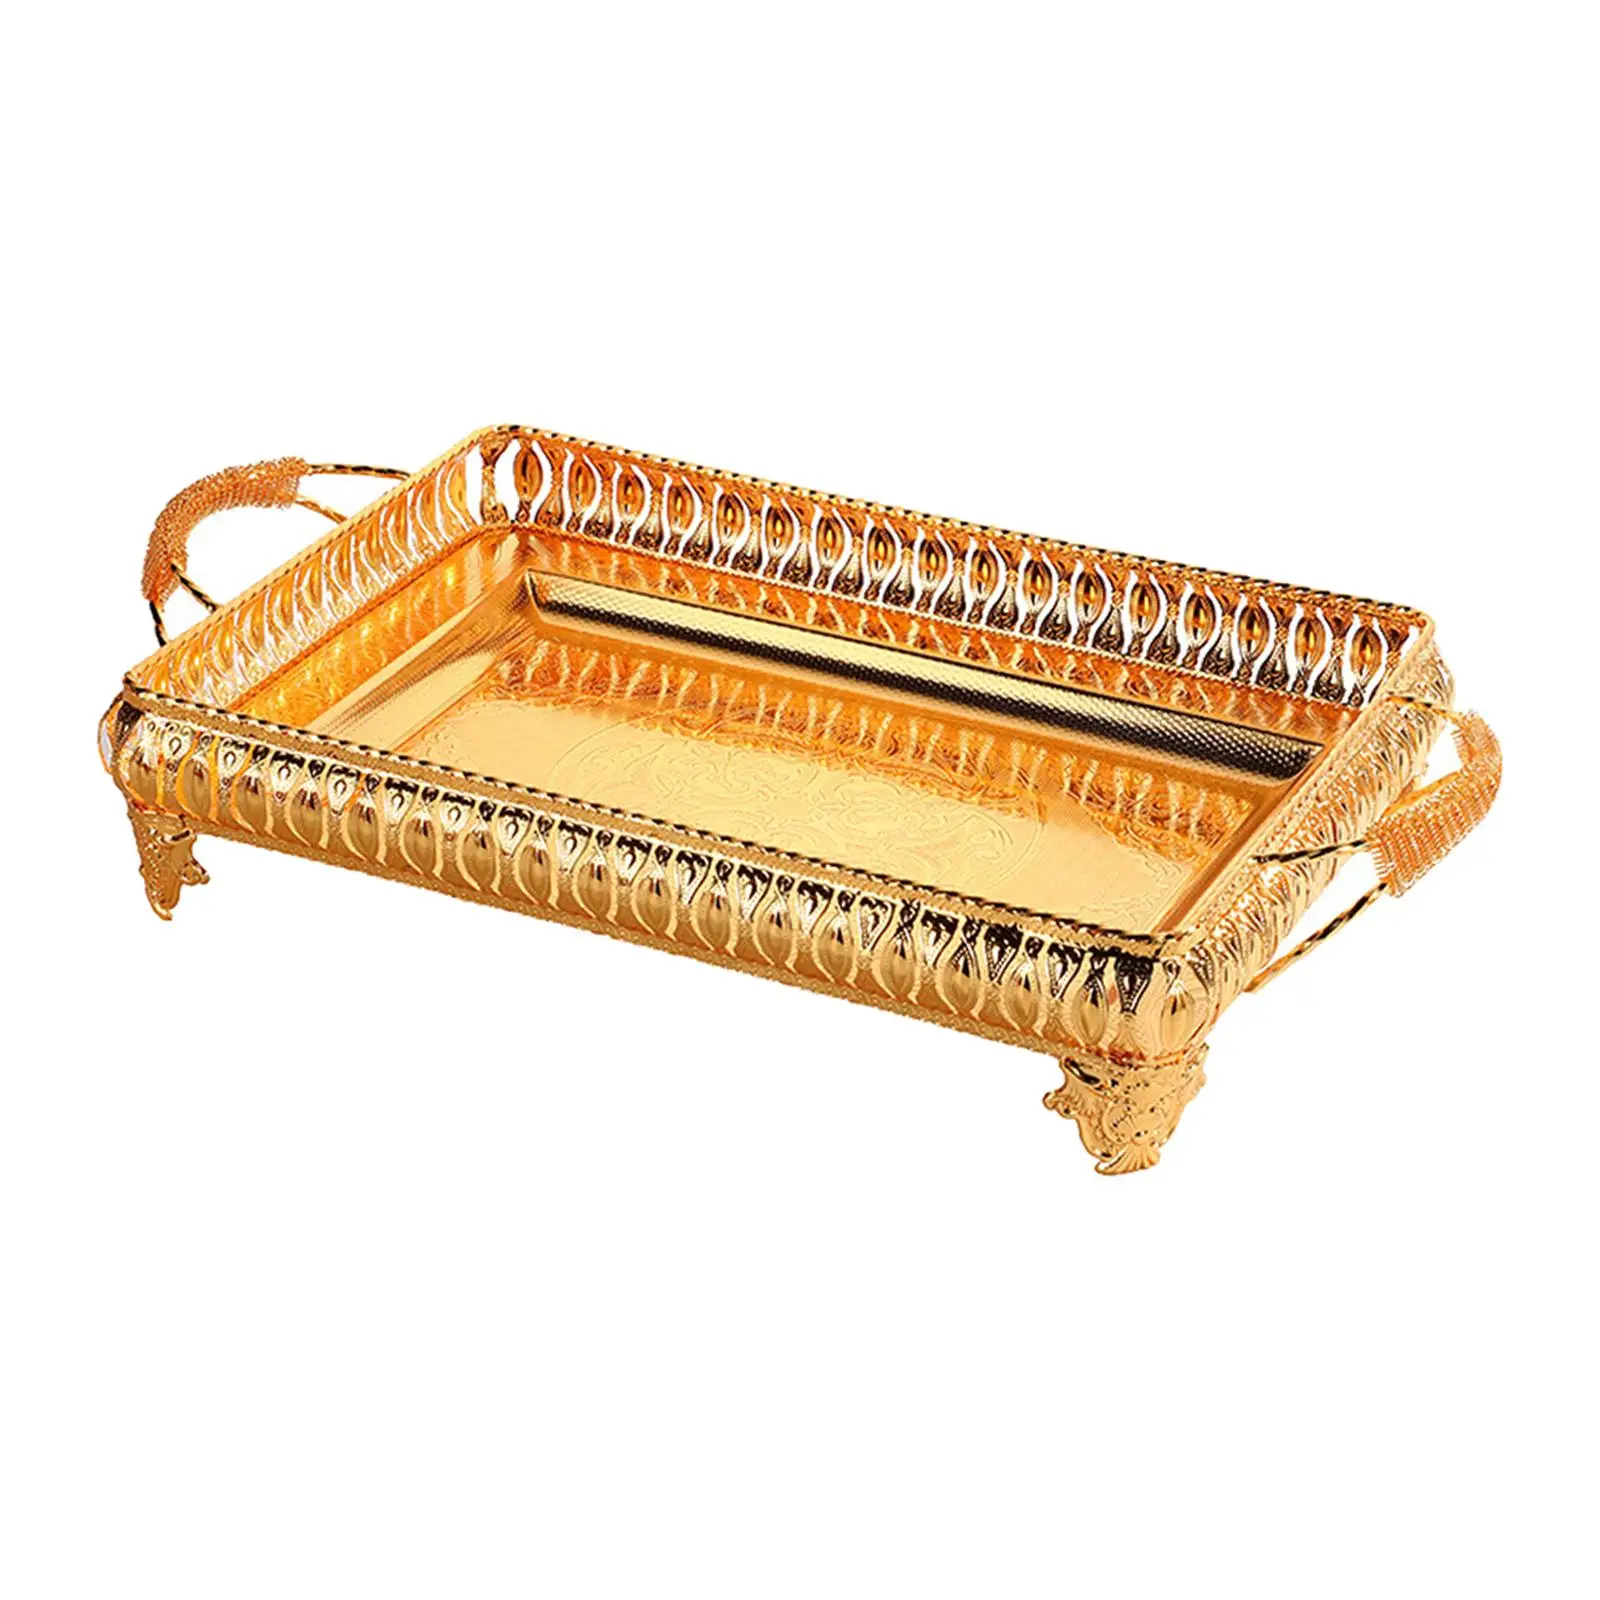 Snack Tray Decorative Dresser Tray Multipurpose Fruit Tray Serving Tray Pastry Plate for Desktop Living Room Home Drinks